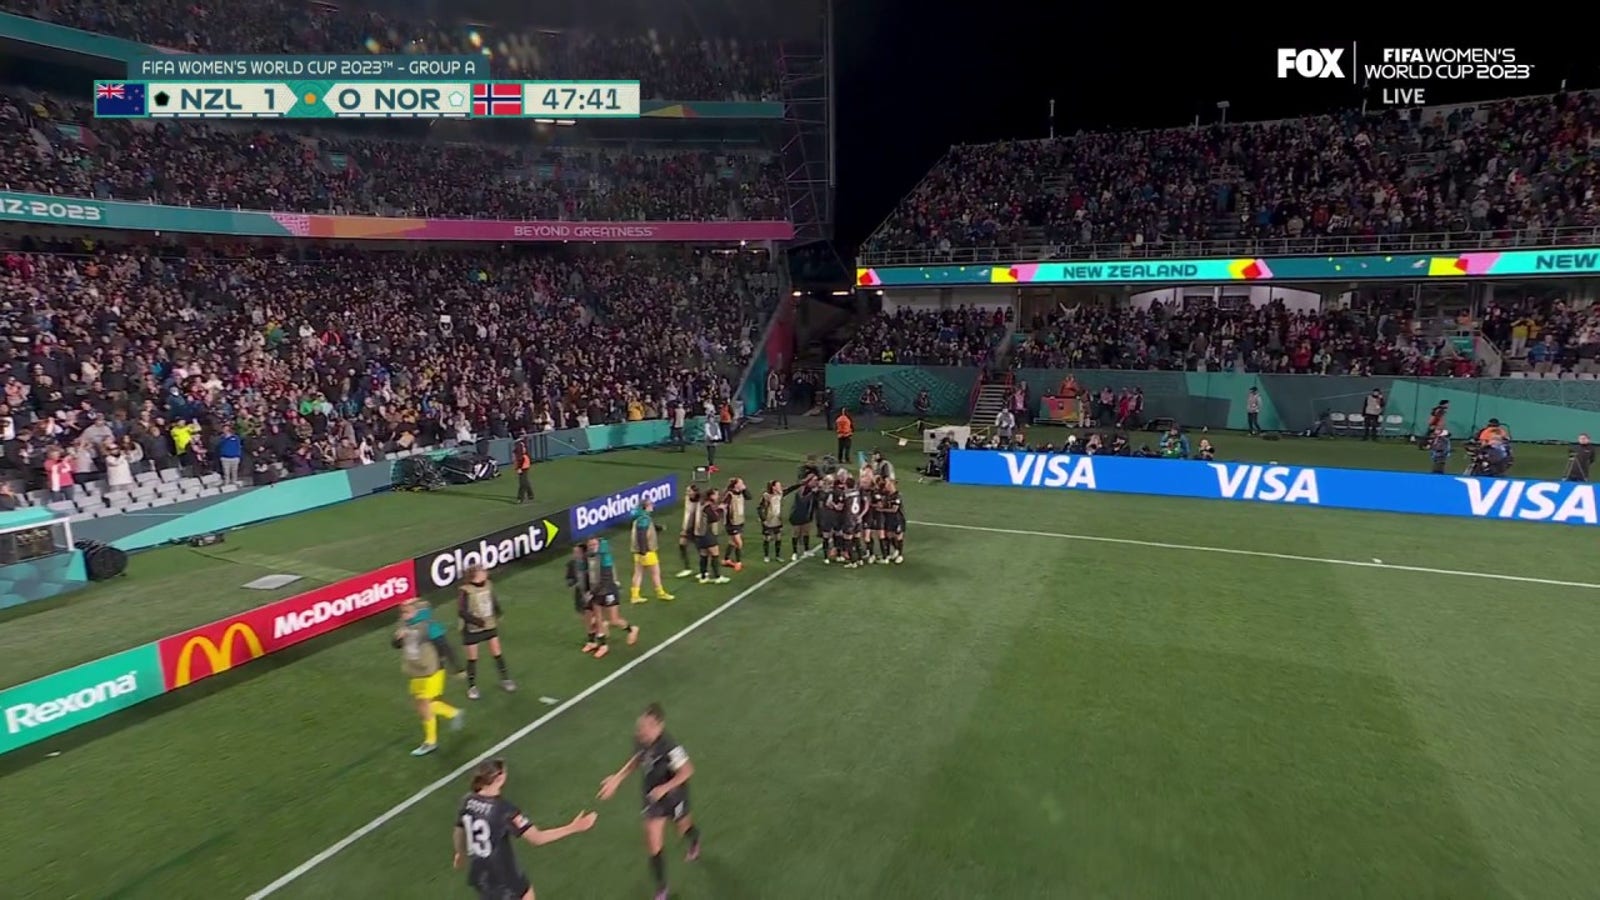 New Zealand's Hannah Wilkinson scores the game's only goal